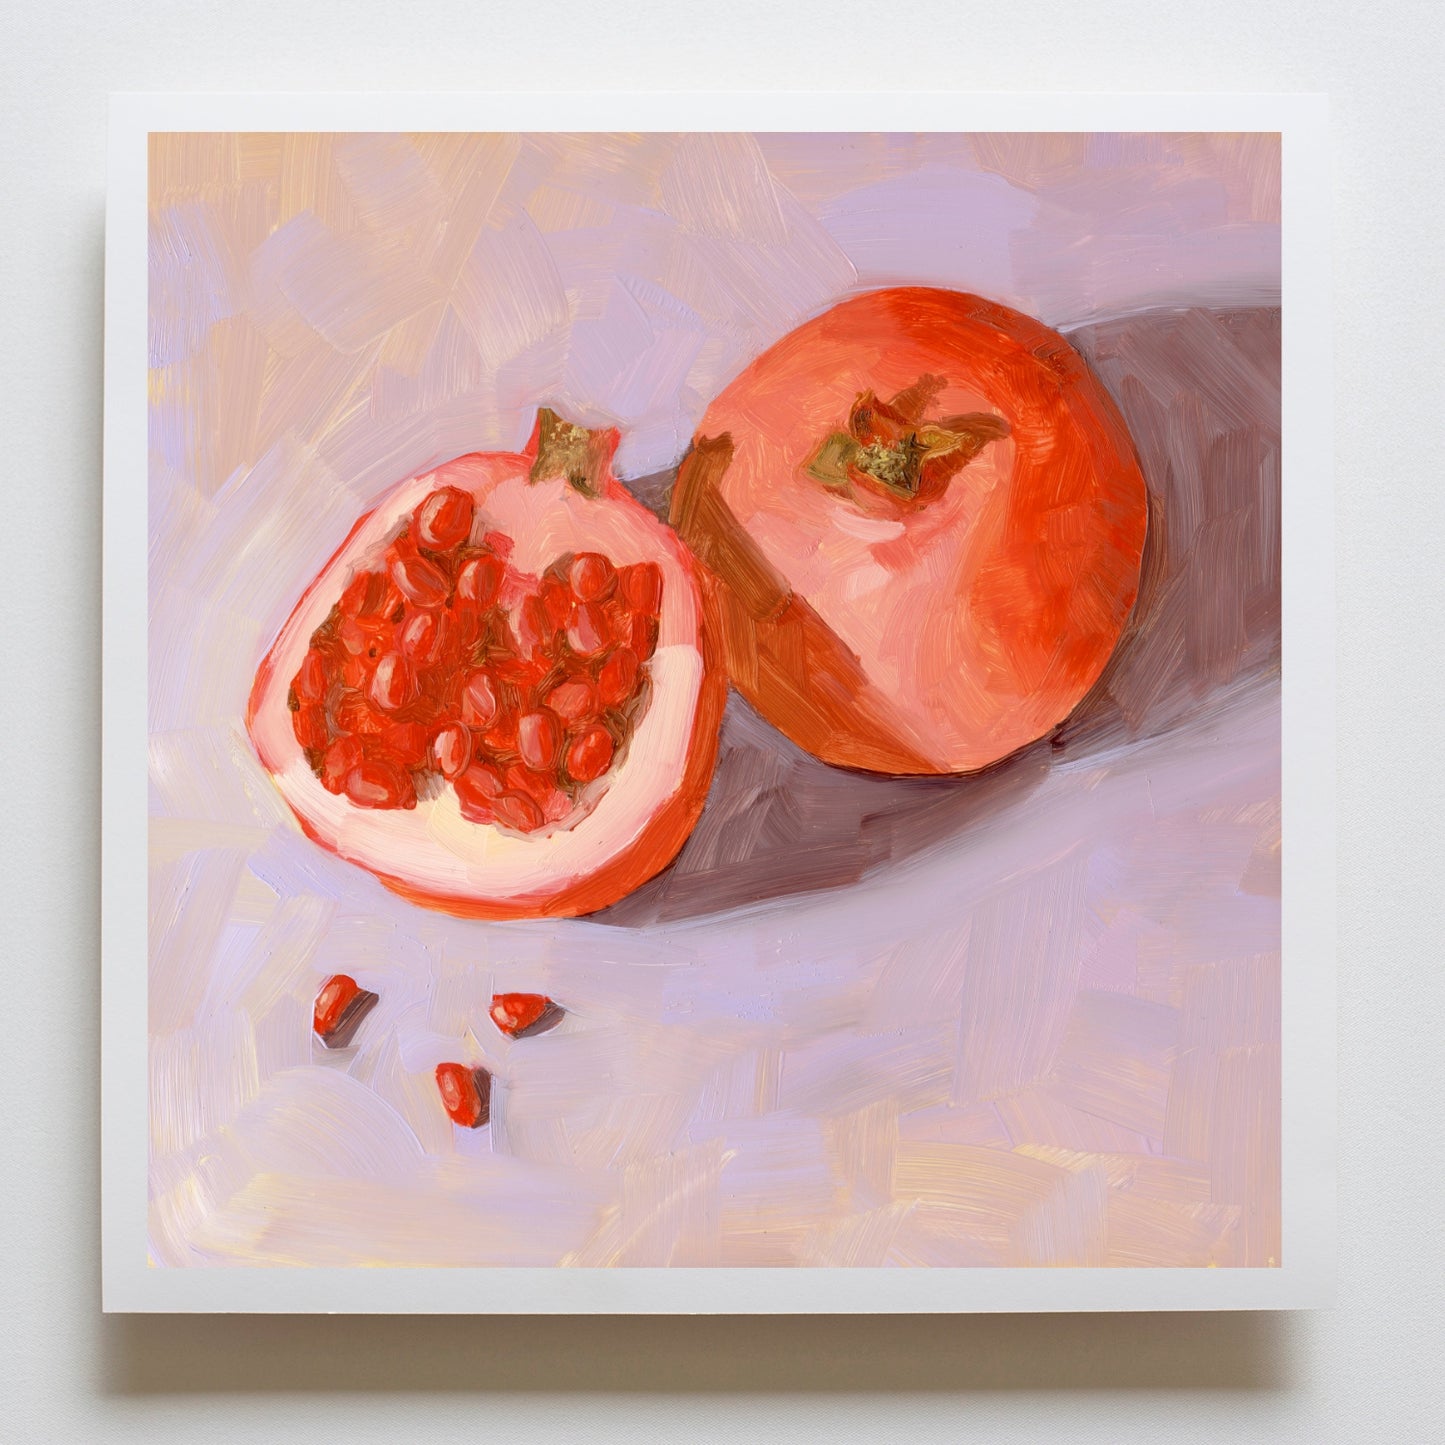 photo of a fine art paper print on board of a full pomegranate and a cut pomegranate and seeds on a textured soft lilac background